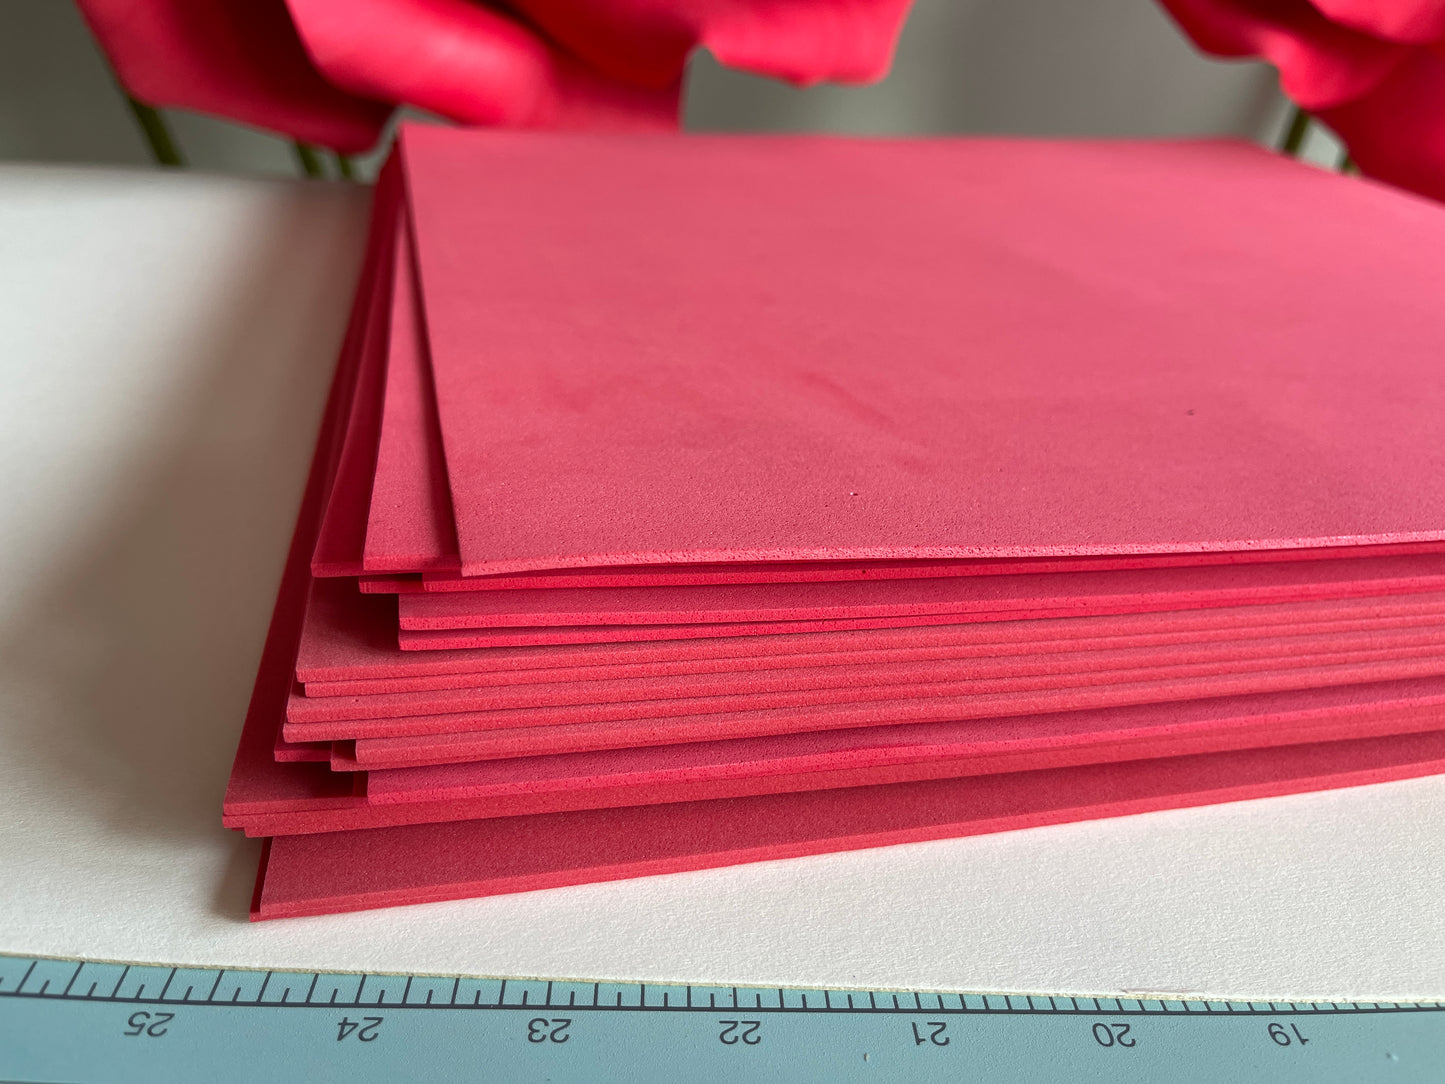 Soft Eva Foam 2 mm thickness Sheets 50x50 cm for Giant Flowers Making